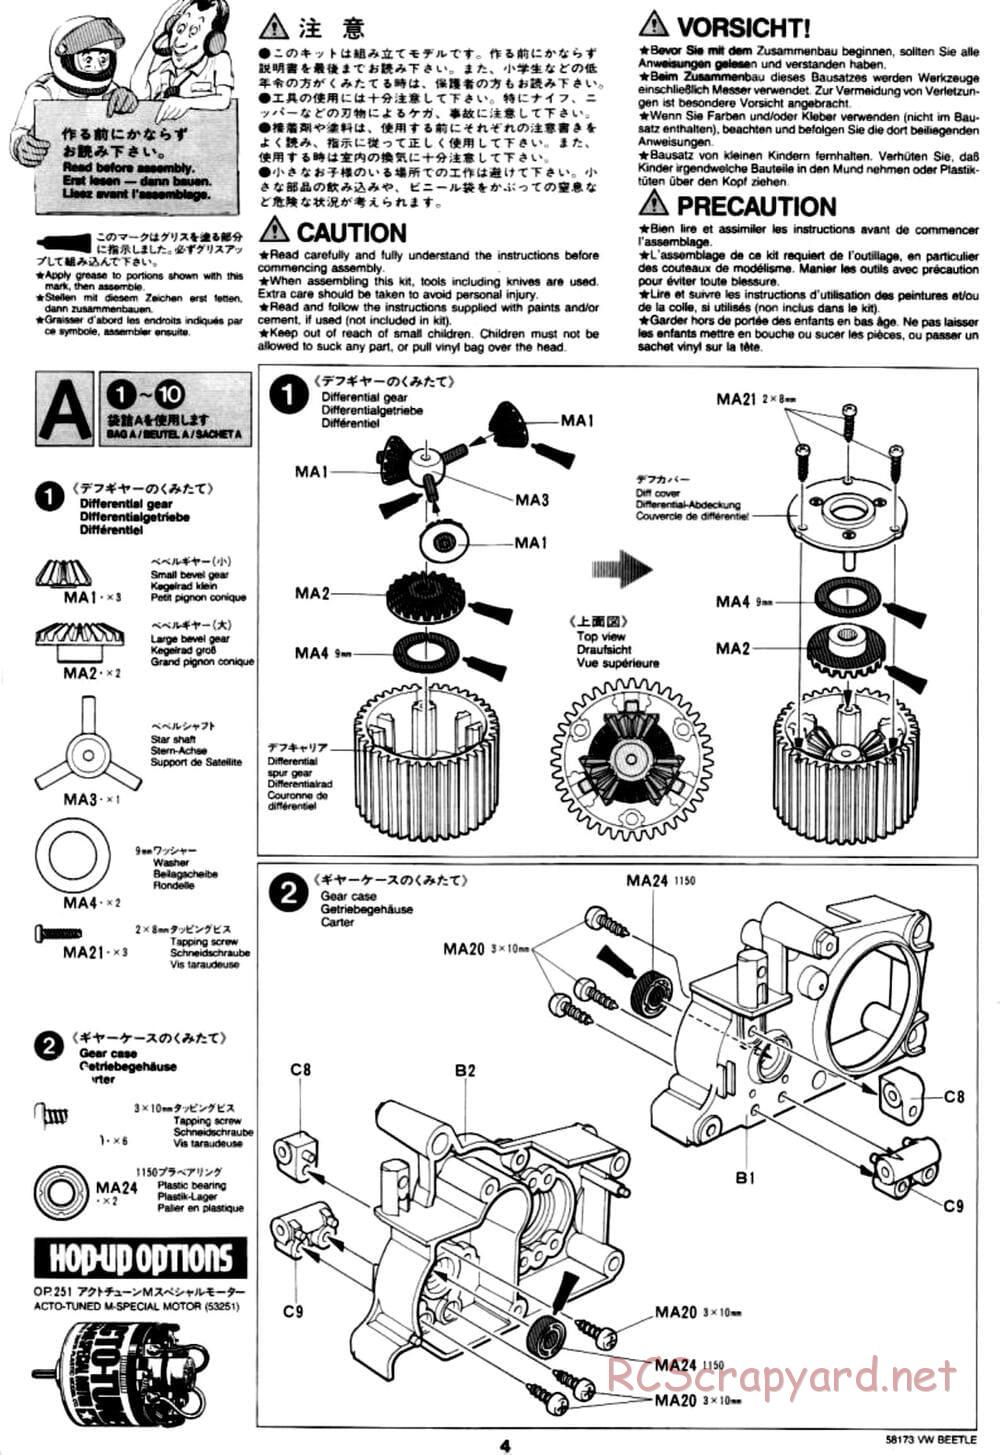 Tamiya - Volkswagen Beetle - M02L Chassis - Manual - Page 4